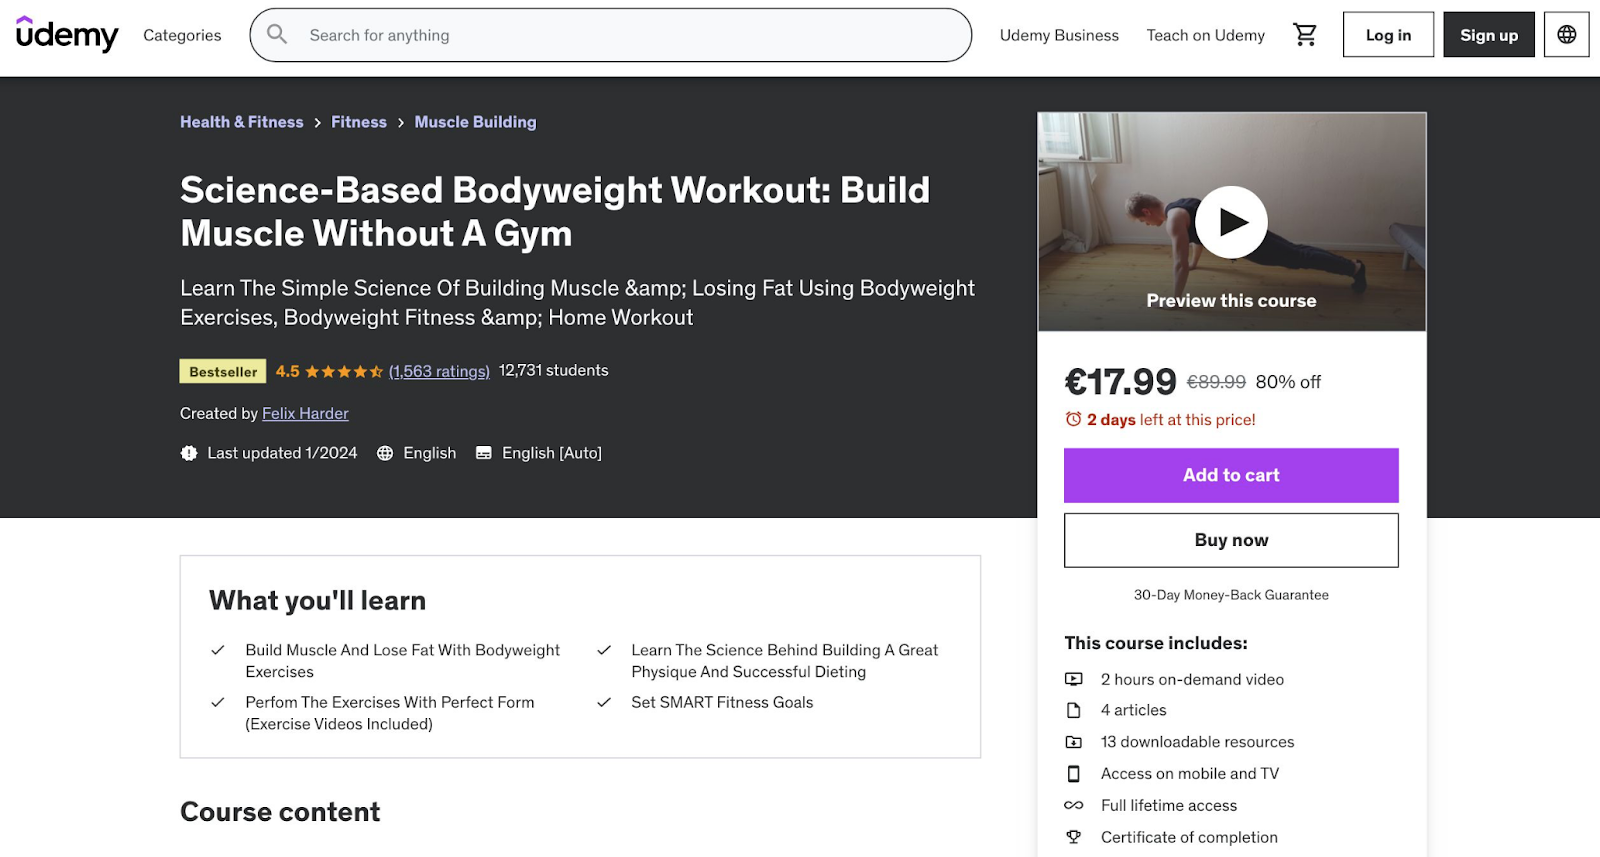 Udemy course "Science-Based Bodyweight Workout: Build Muscle without a Gym" landing page